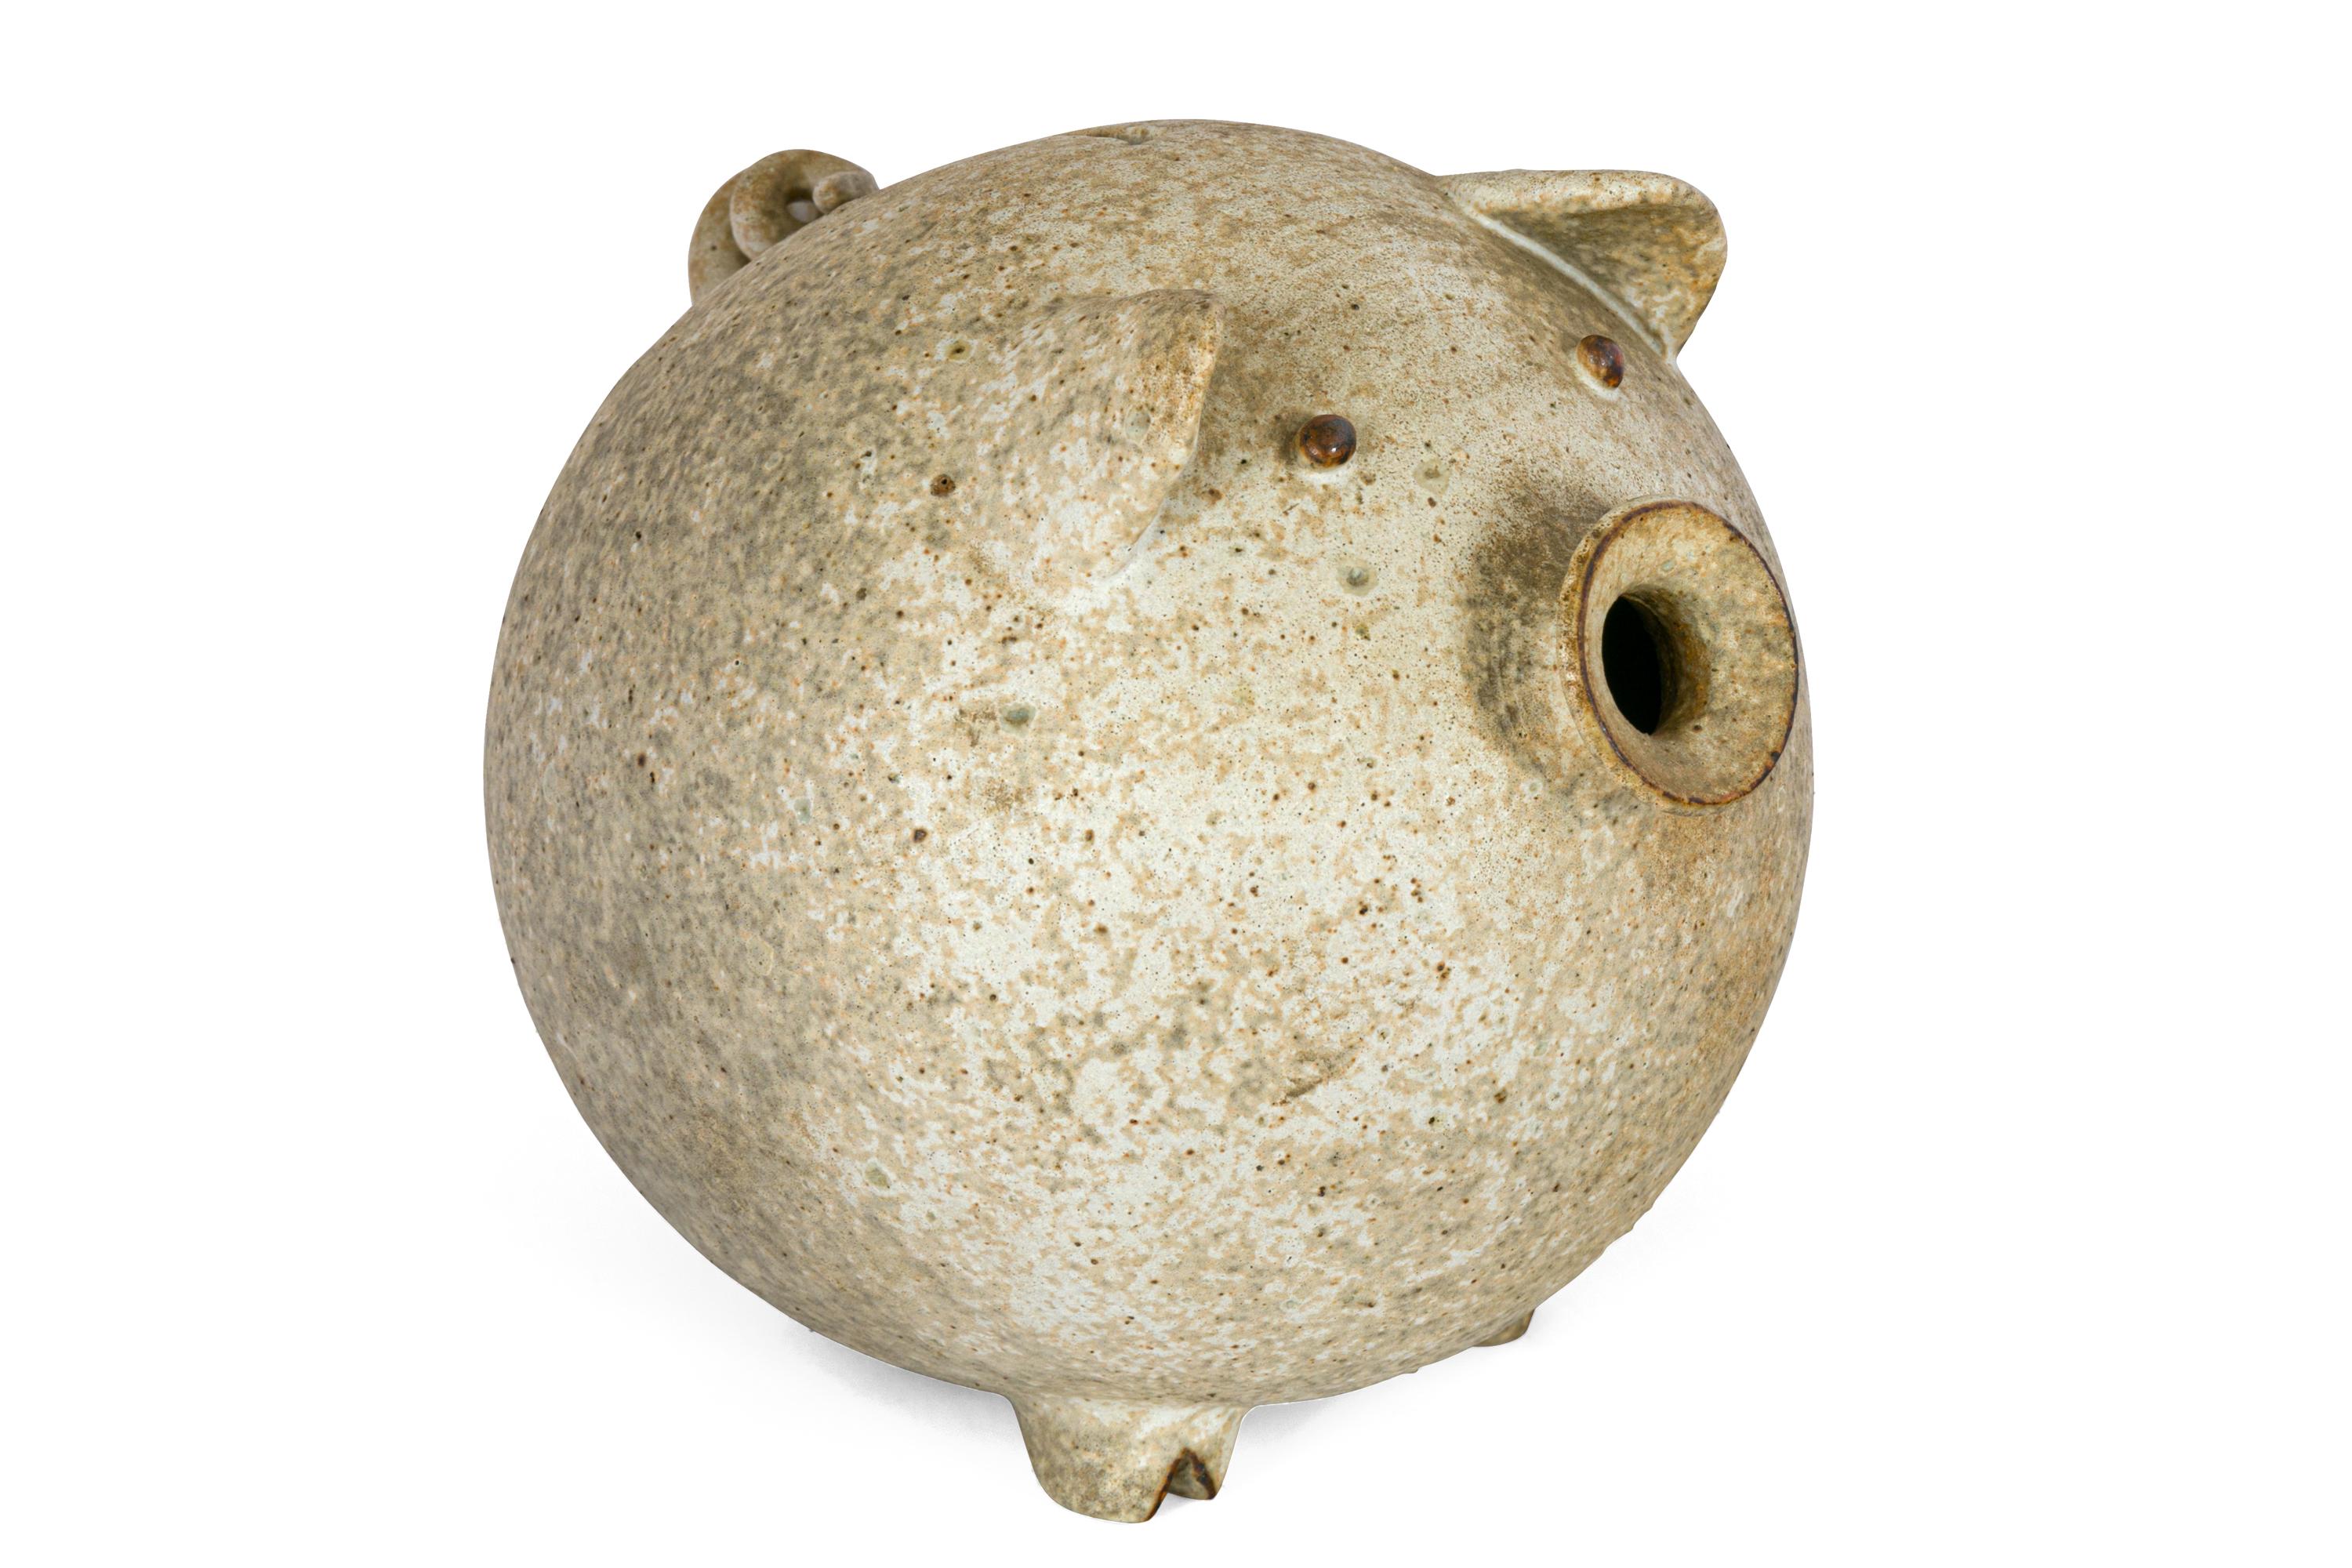 A playful and functional piece of pottery until the day you decide to empty out the coins. Until that time you will have the pleasure of enjoying a wonderfully whimsical piece of sculptural pottery.